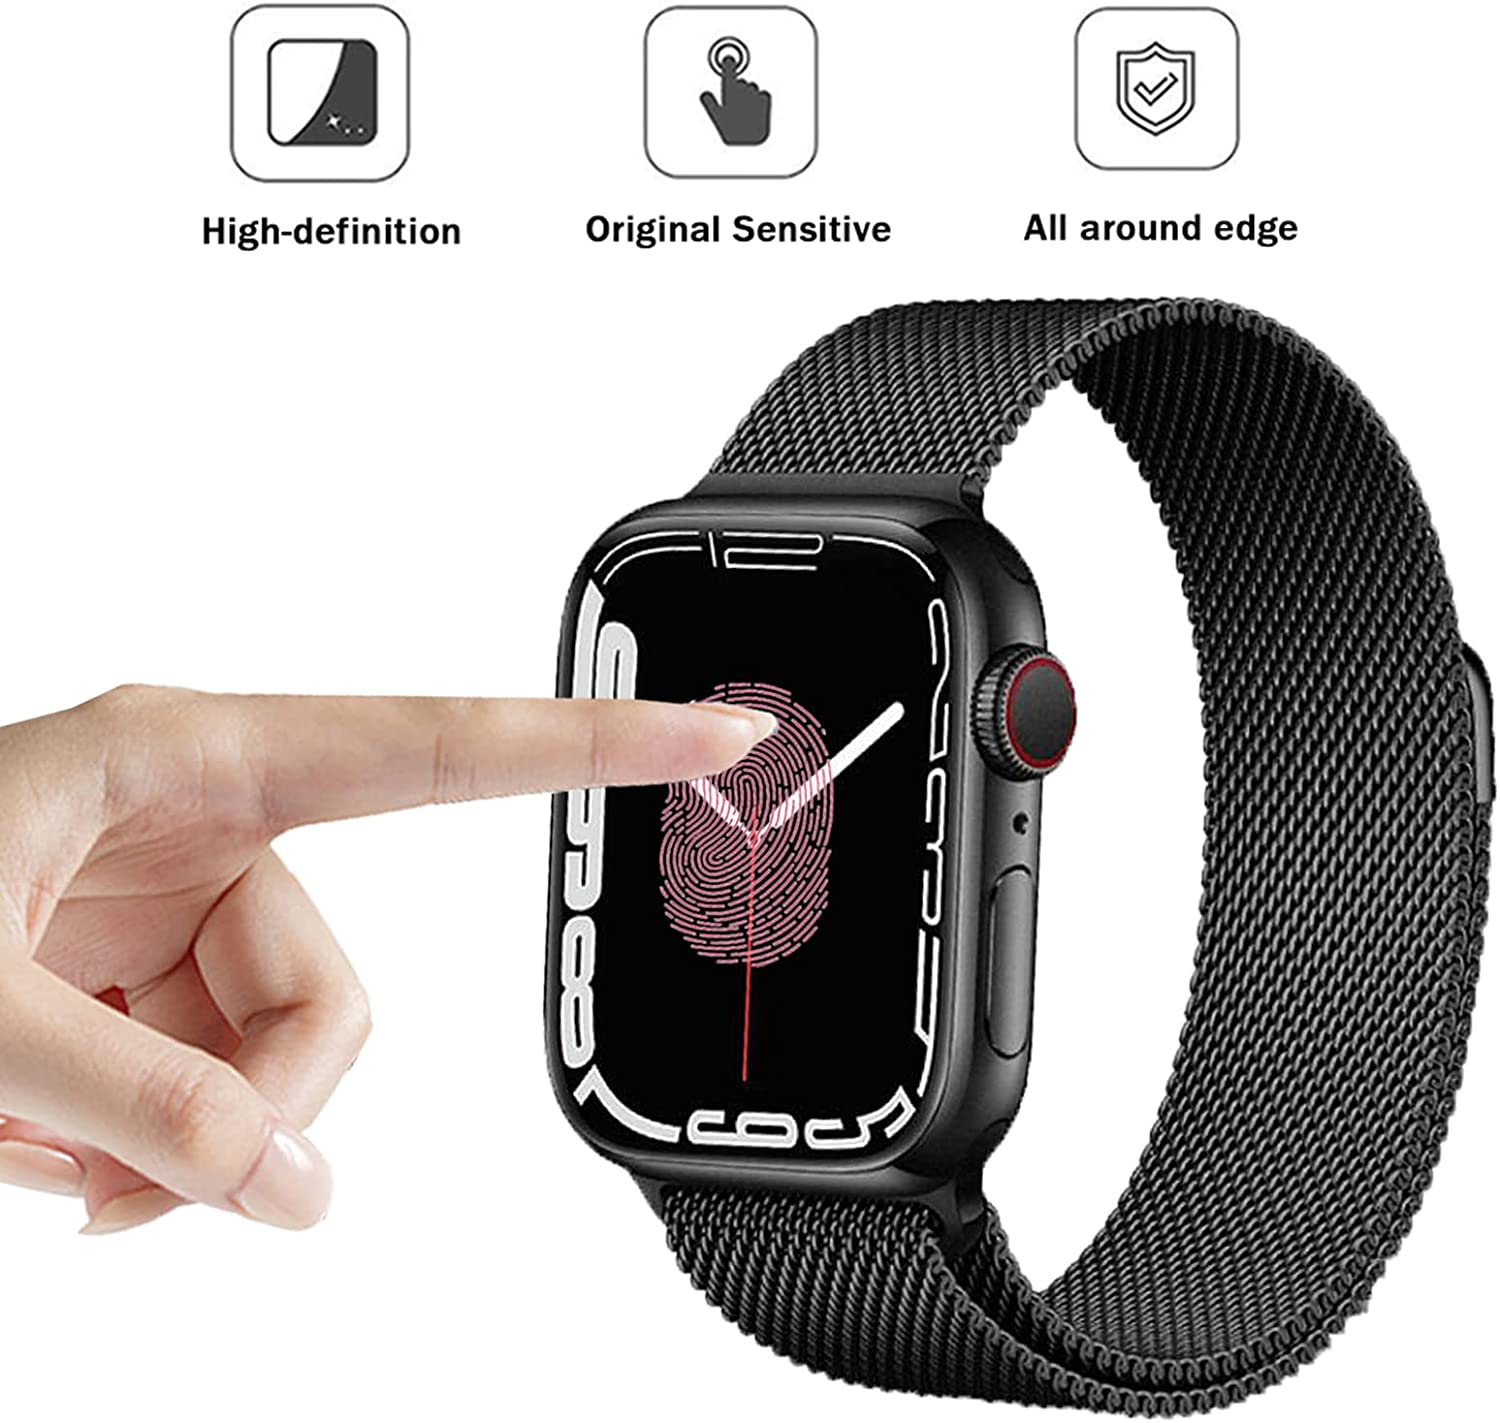 Premium Protection PMMA Screen Protector for Apple WATCH Series 6/5/4/SE [40MM] (Clear)